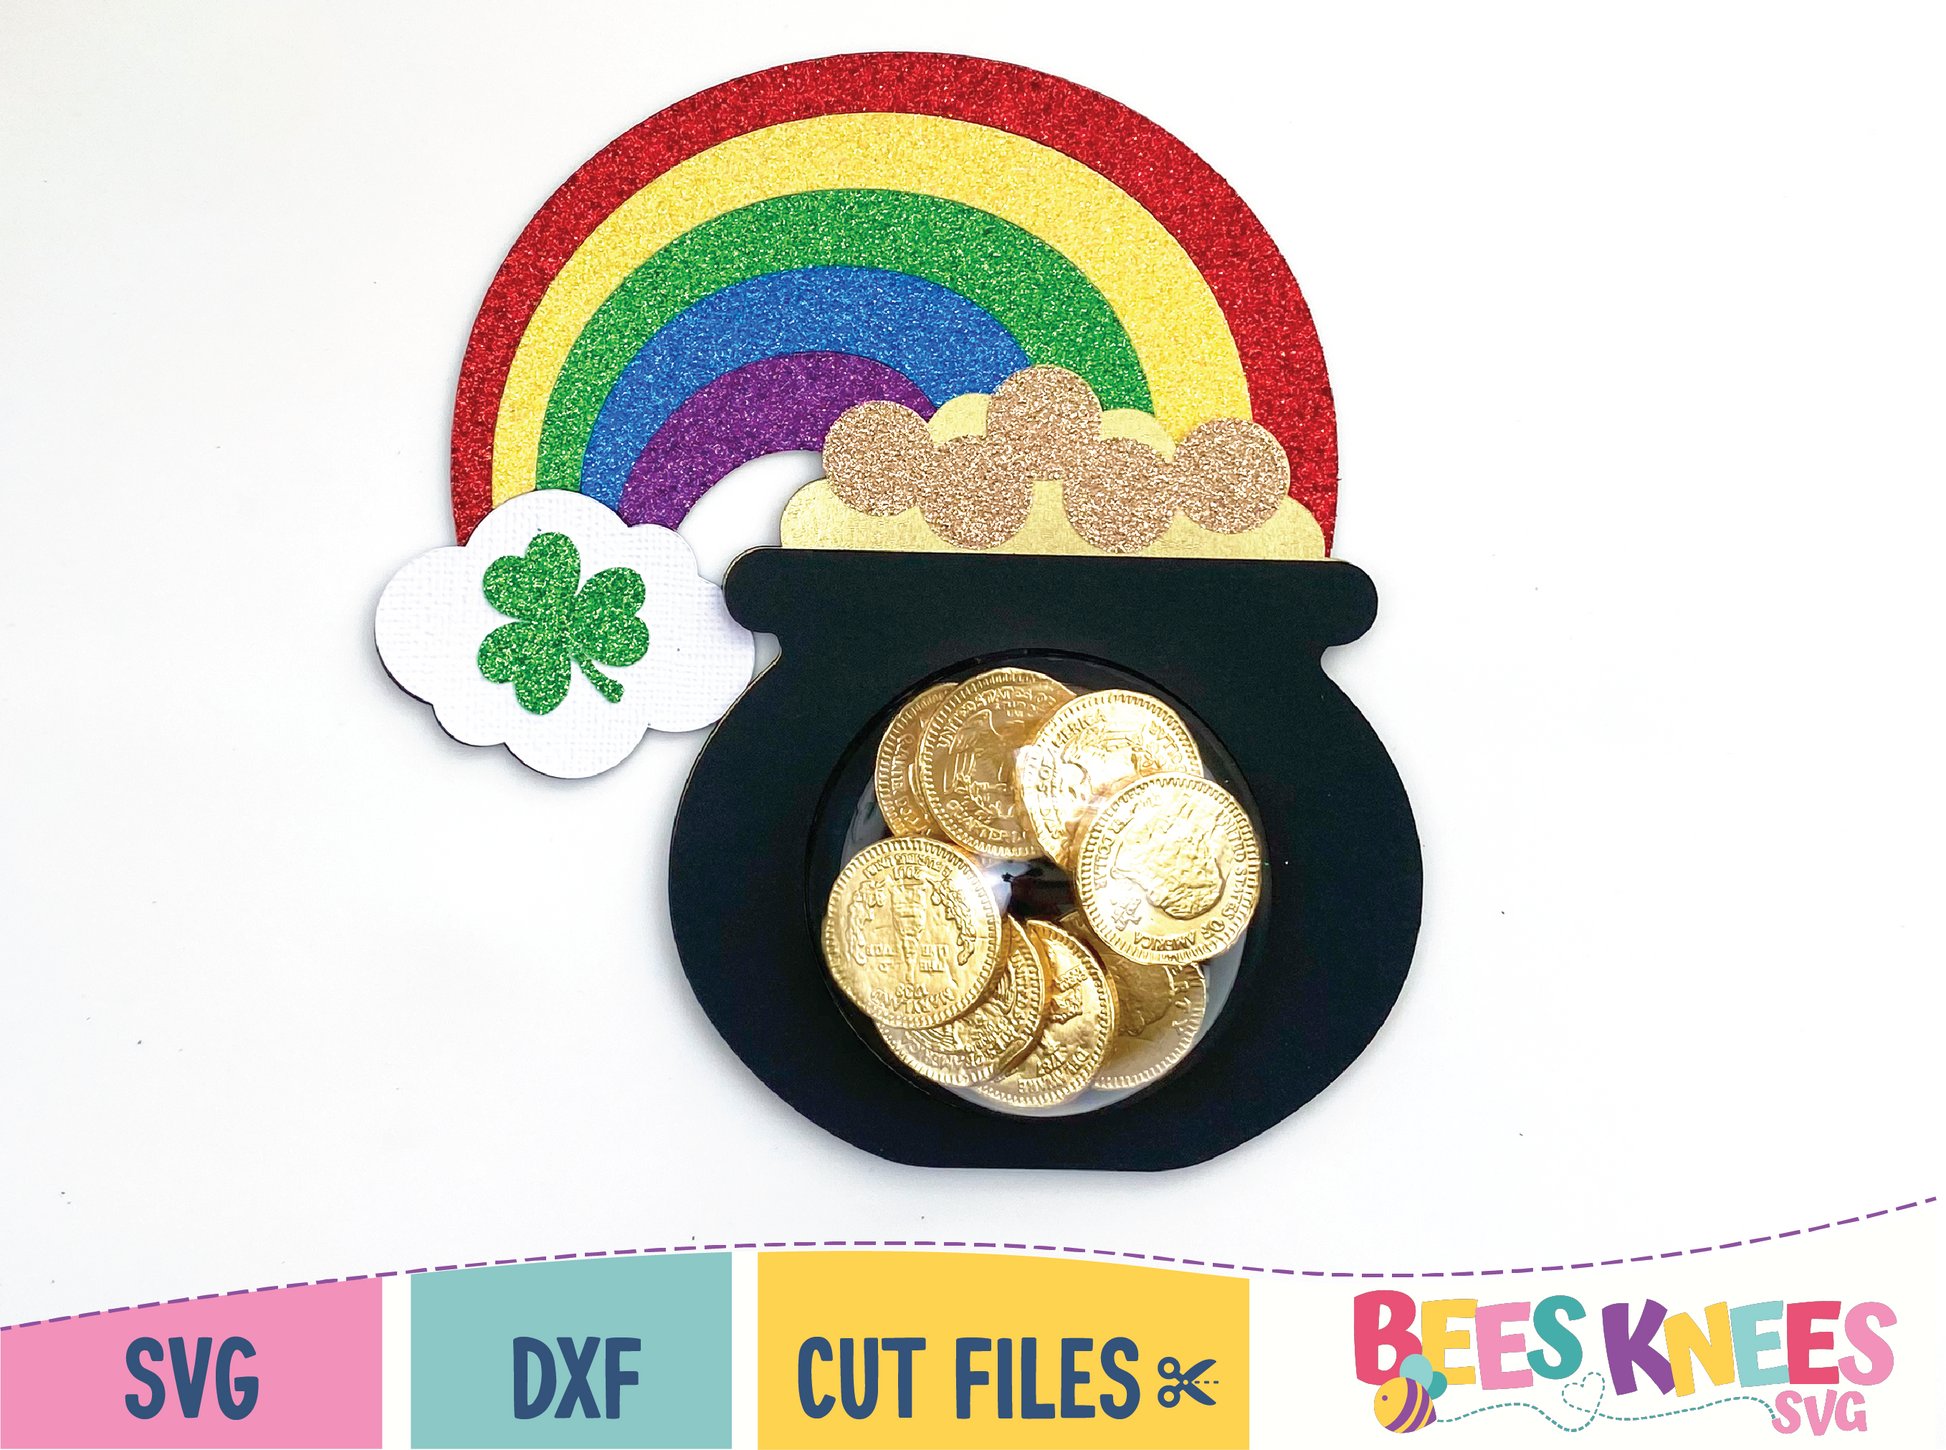 Pot of Gold Dome Candy Holder SVg Template for Cricut or Silhouette